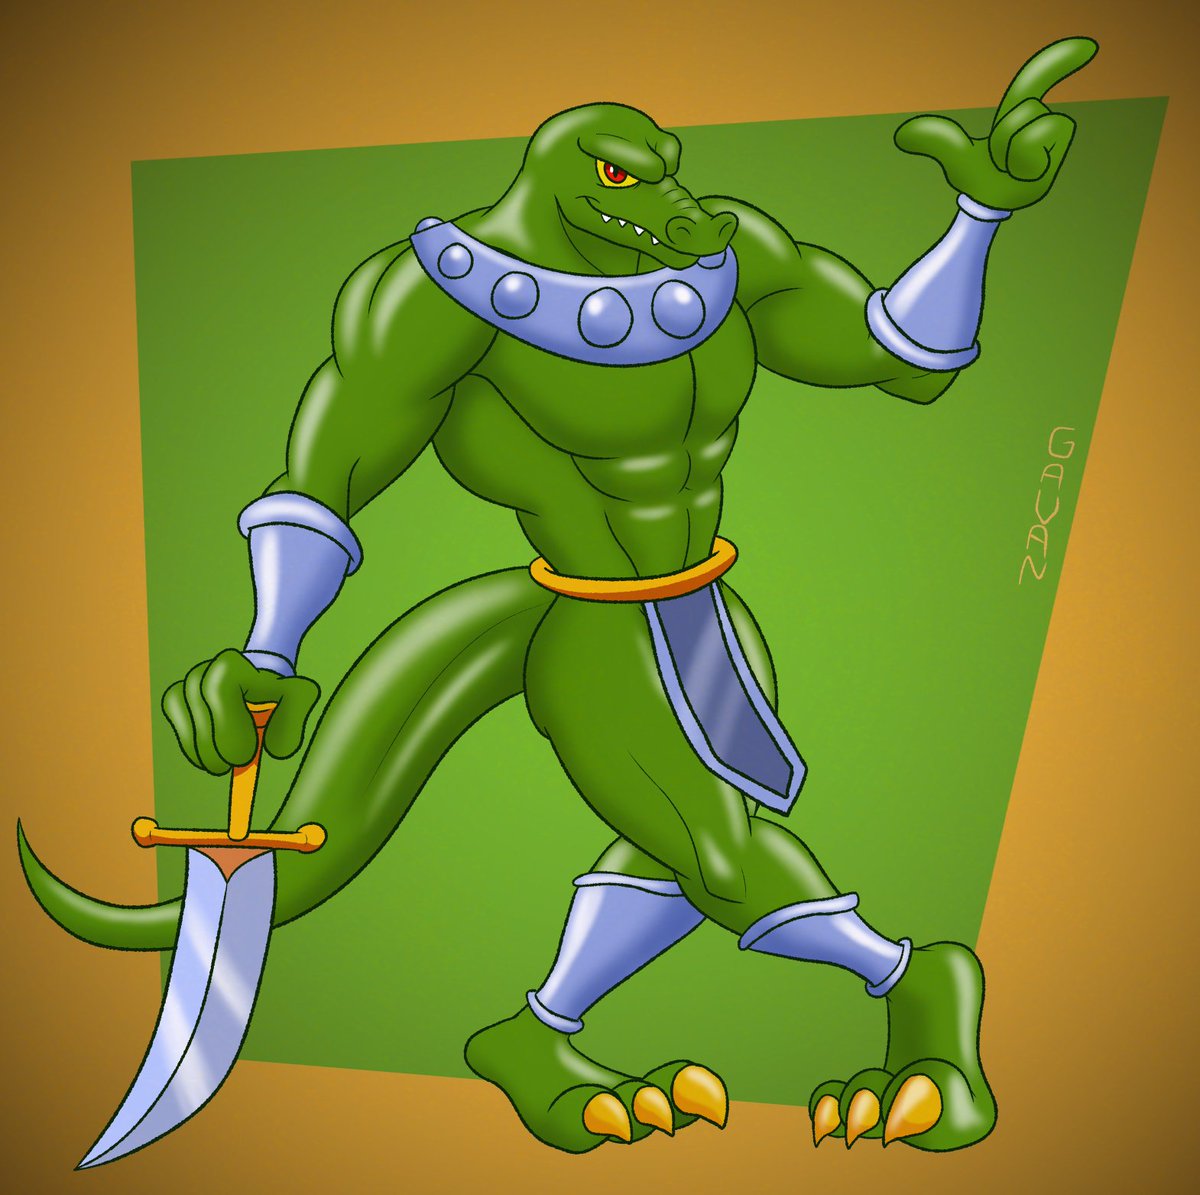 Here's that lizardman from old beat-em-up again, I like the cut of his jib. 'Special' version at patreon.com/gavanzude
#TheKingofDragons